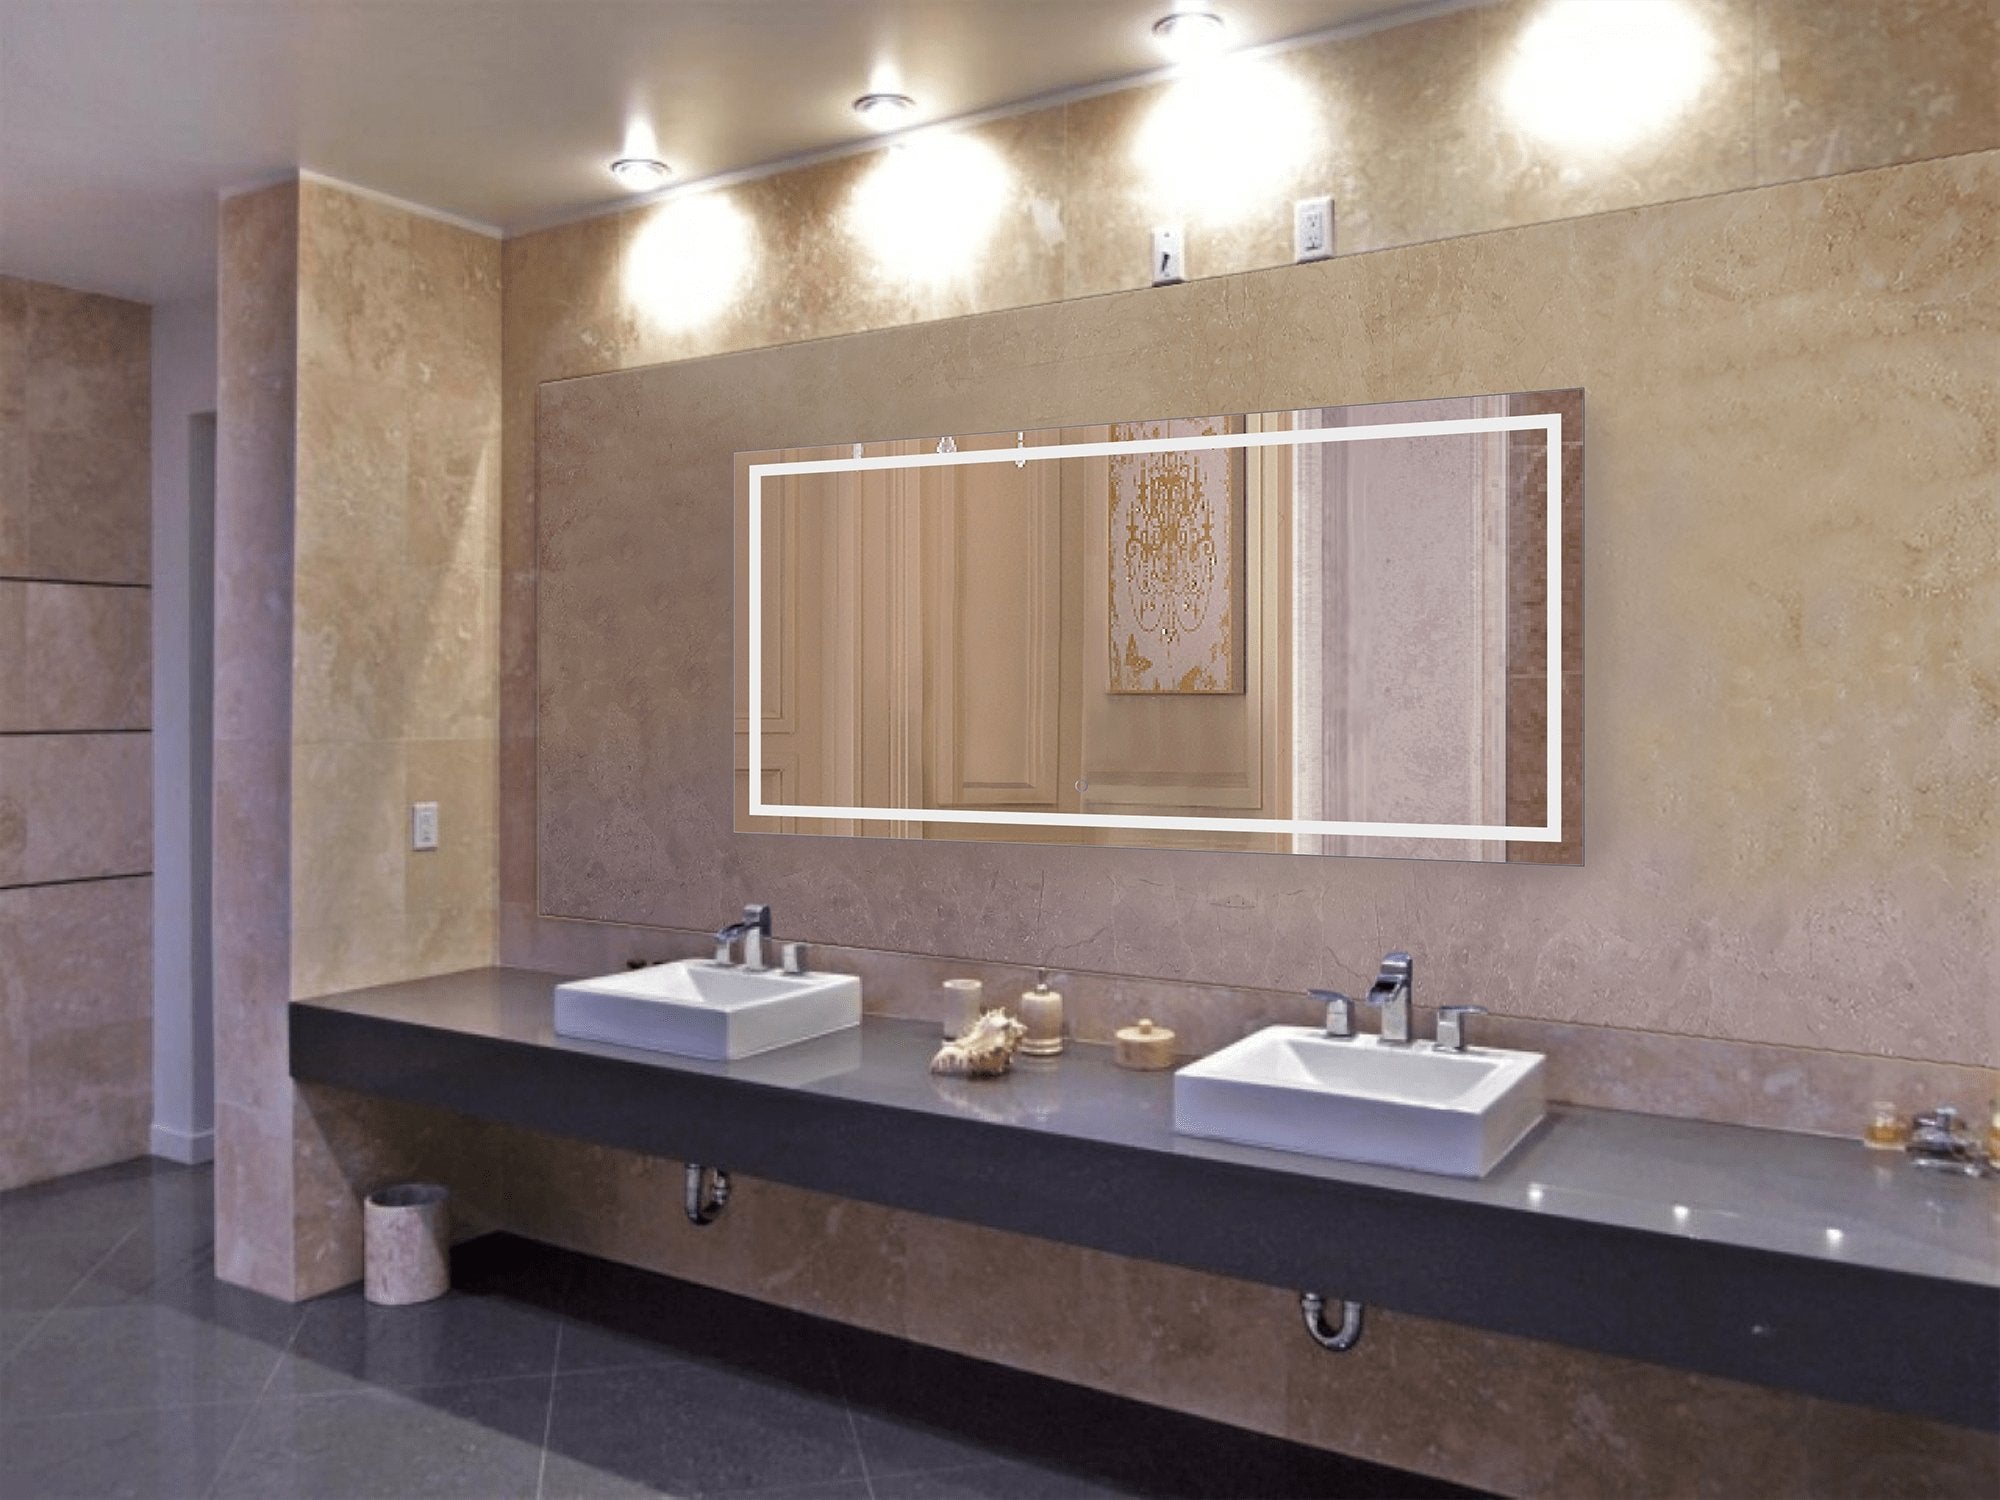 Icon 72" X 36" LED Bathroom Mirror w/ Dimmer & Defogger | Large Lighted Vanity Mirror - Molaix - Molaix850033437027Lighted Wall Mirror,RectangleICON7236